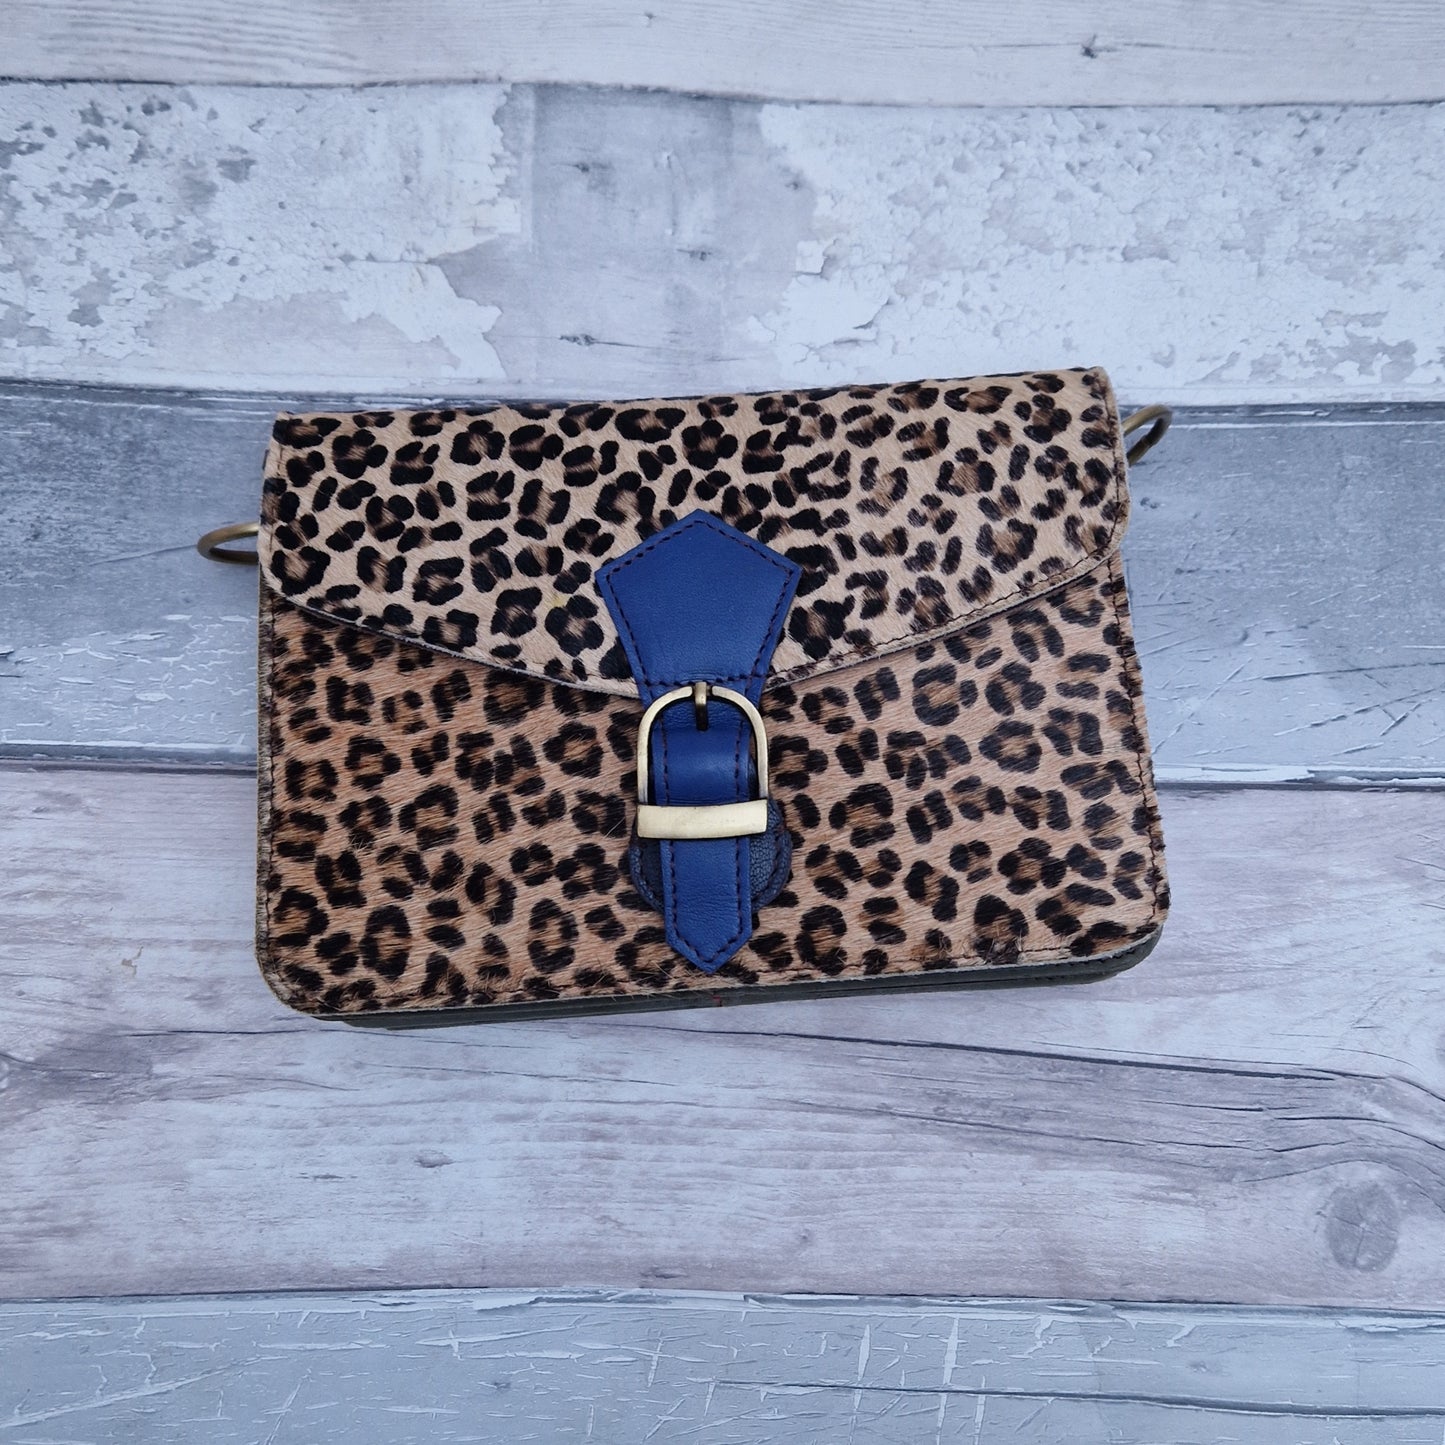 Leather handbag with textured panels of Leopard print.